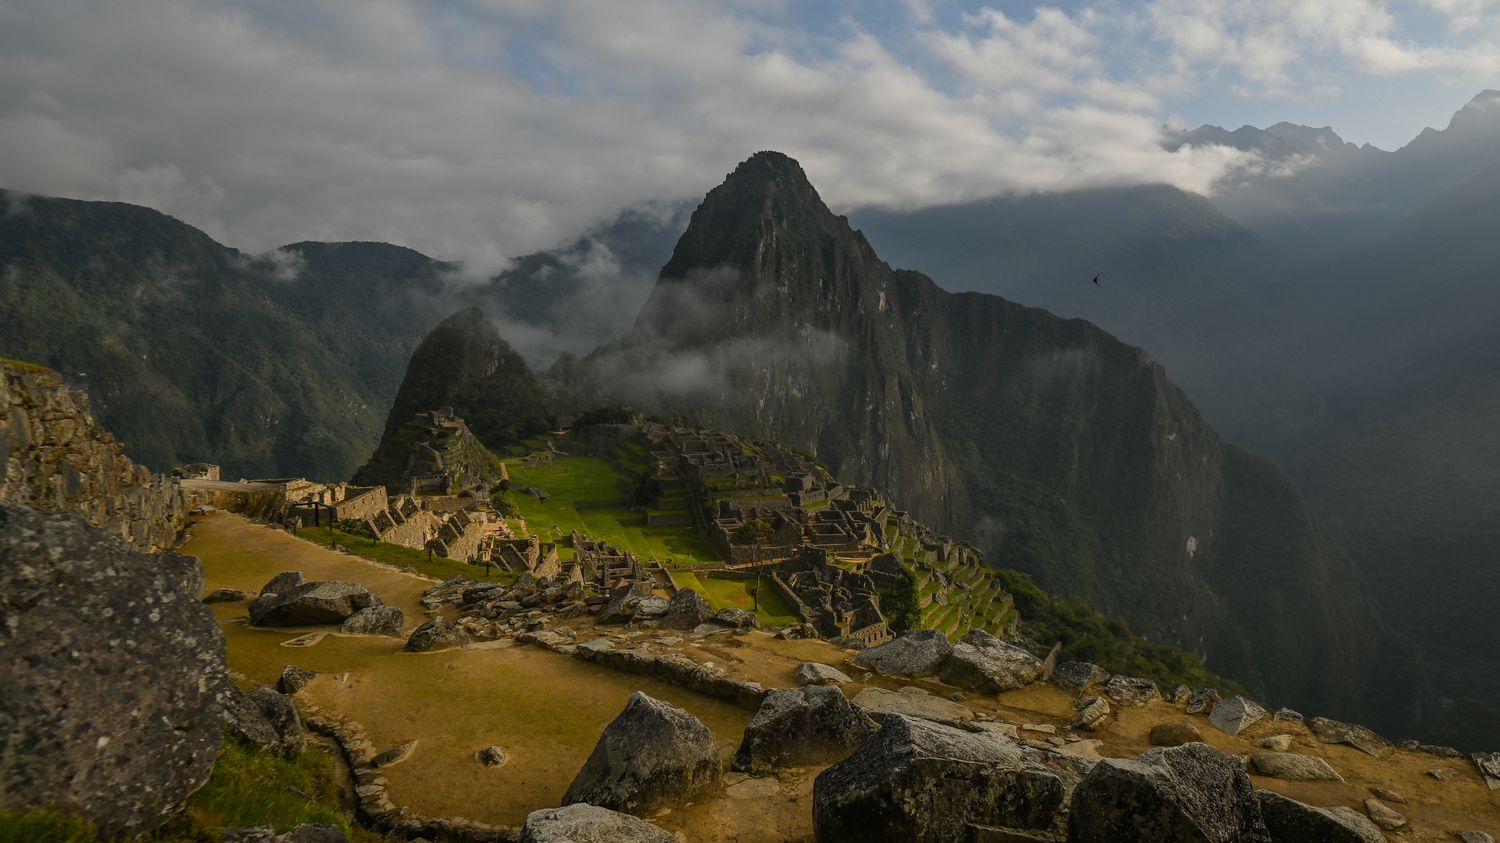 Peru: Machu Picchu closed to the public due to unrest in the country
